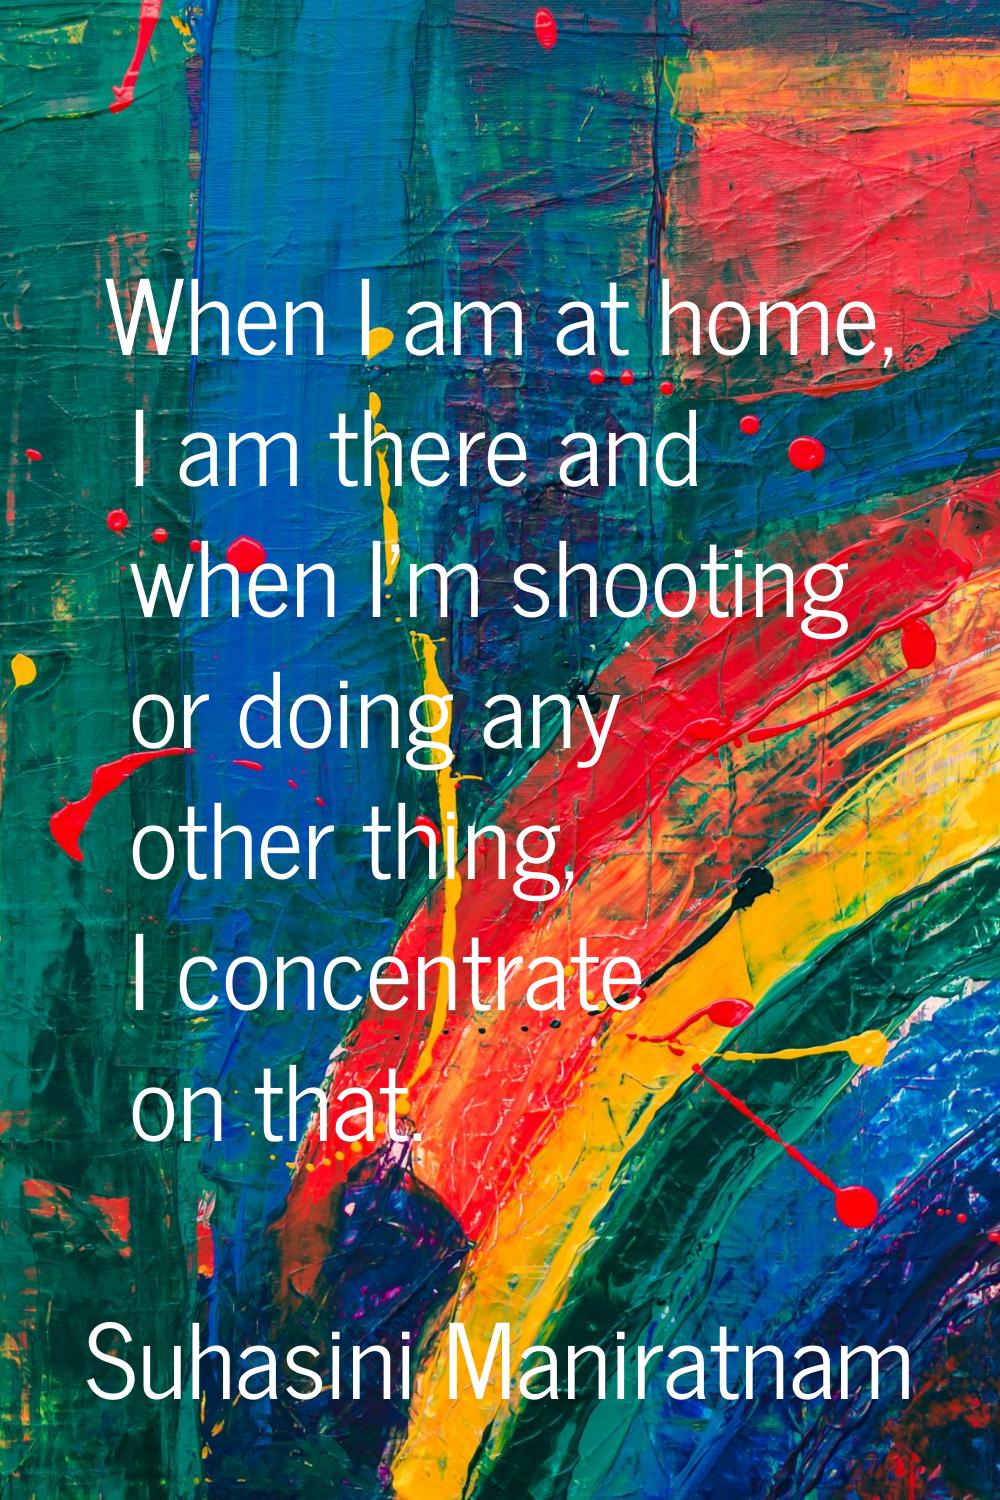 When I am at home, I am there and when I'm shooting or doing any other thing, I concentrate on that